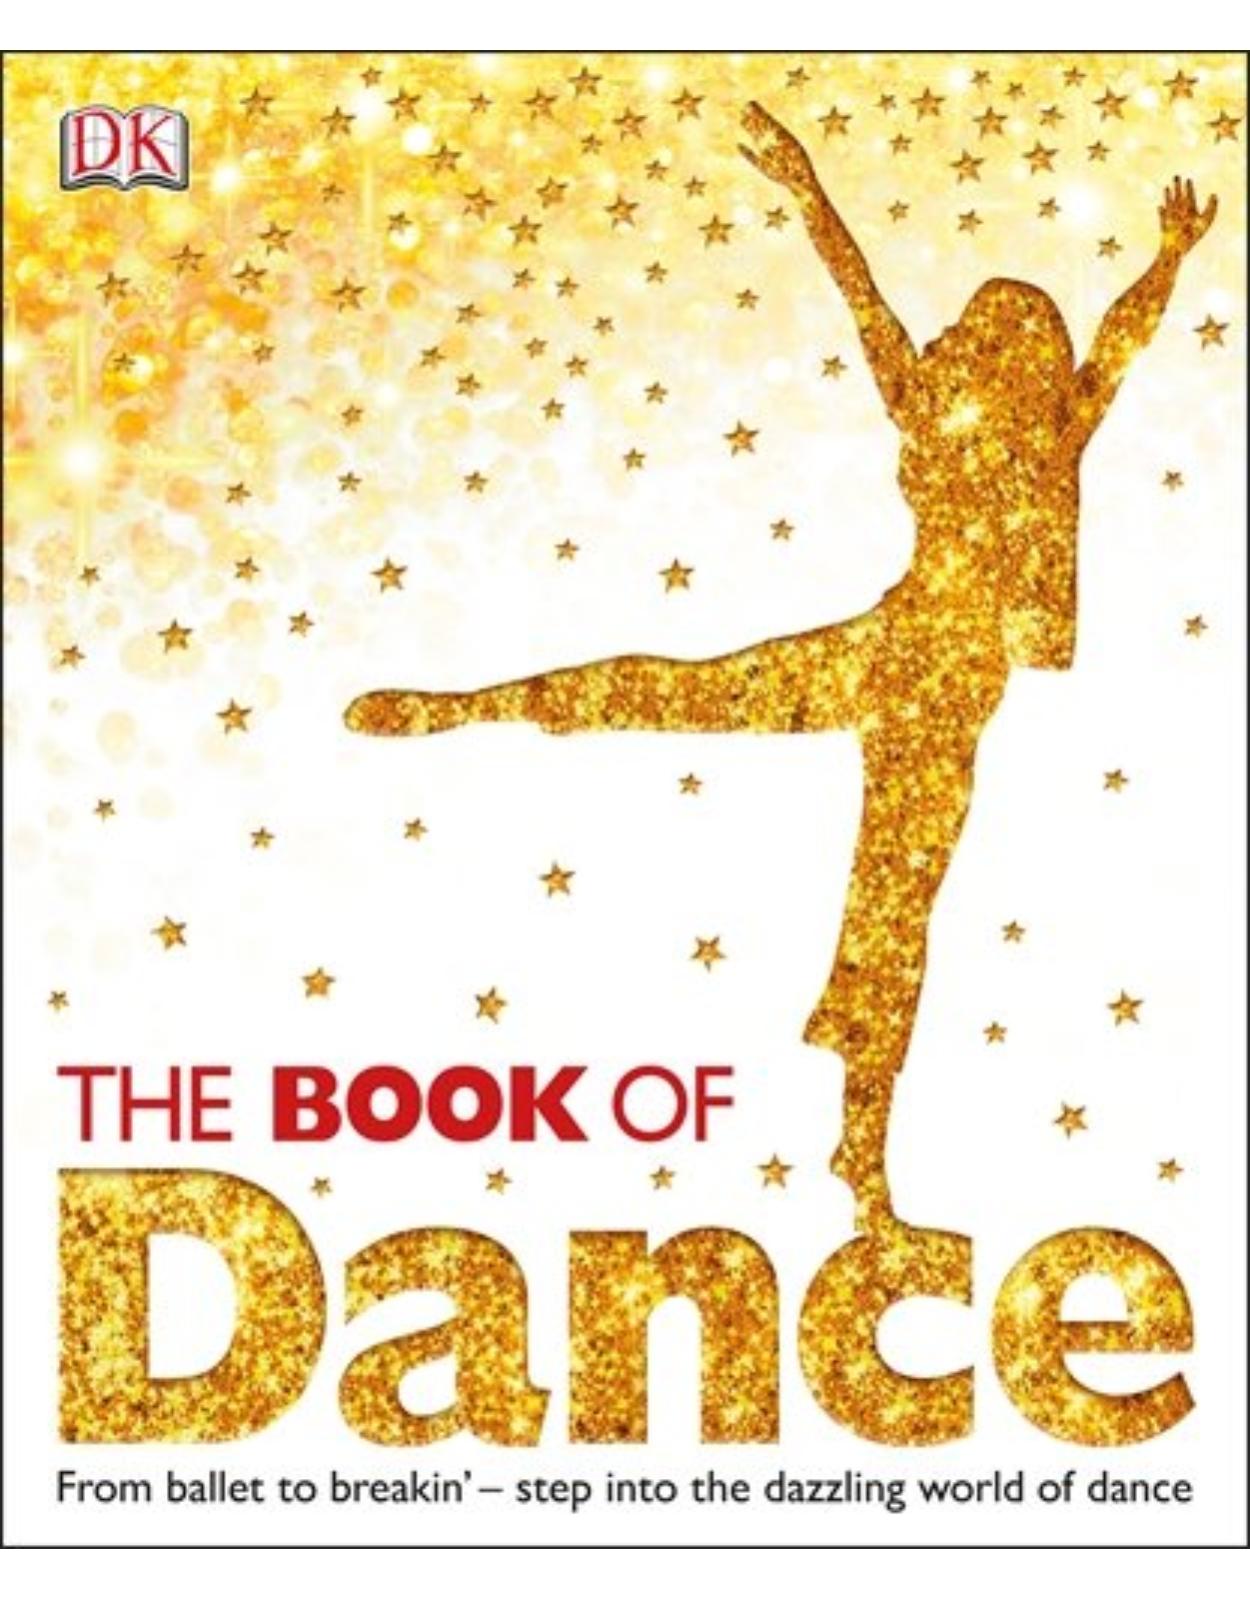 The Book of Dance